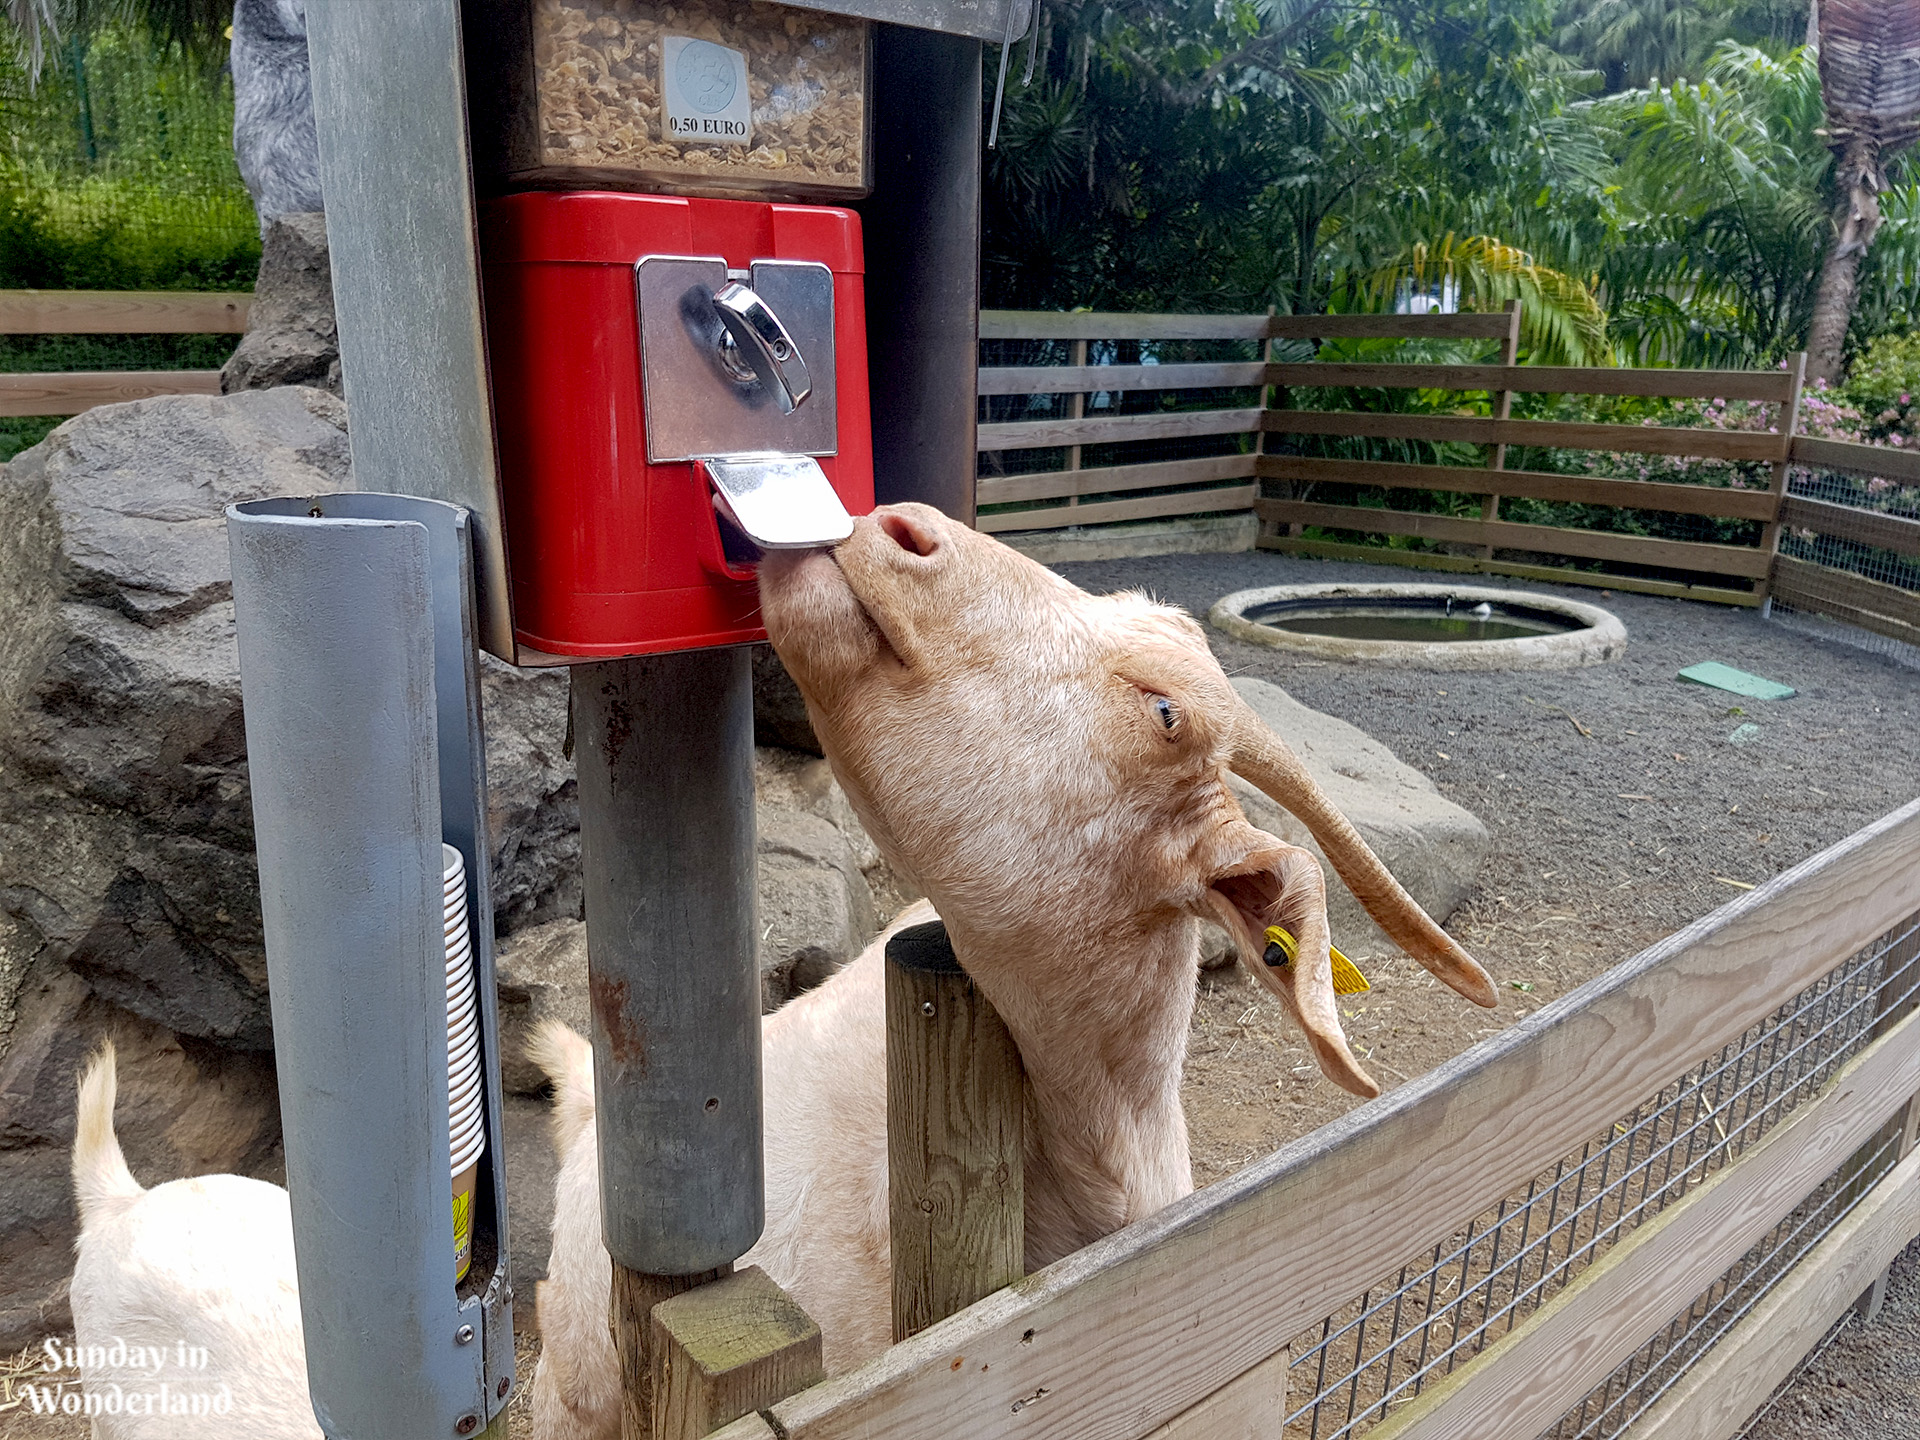 A goat eating from food distributor in Botanical Garden in Deshaies in Guadeloupe - Sunday in Wonderland Blog